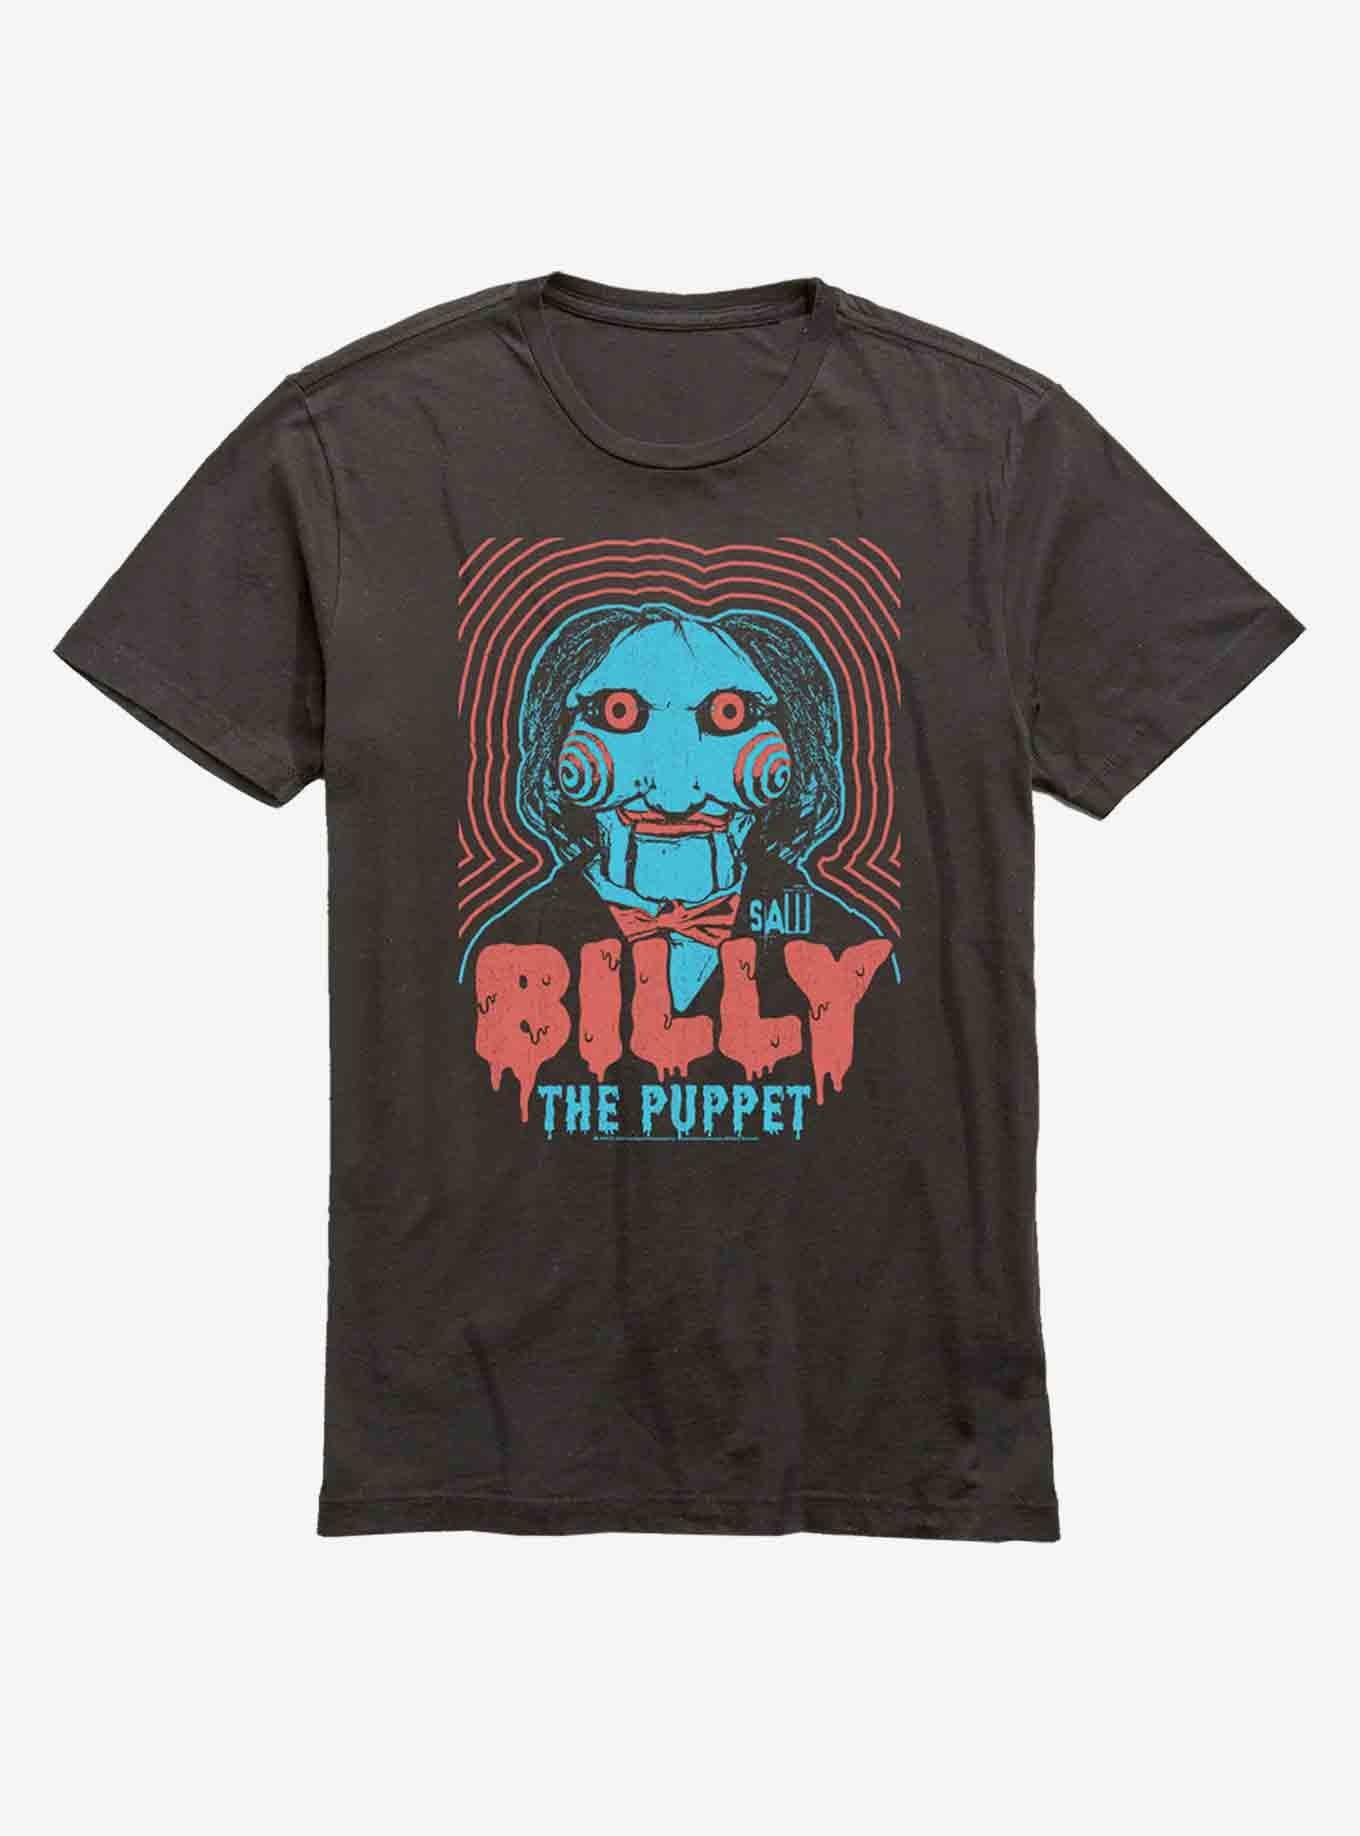 Saw Billy The Puppet T-Shirt, BLACK, hi-res